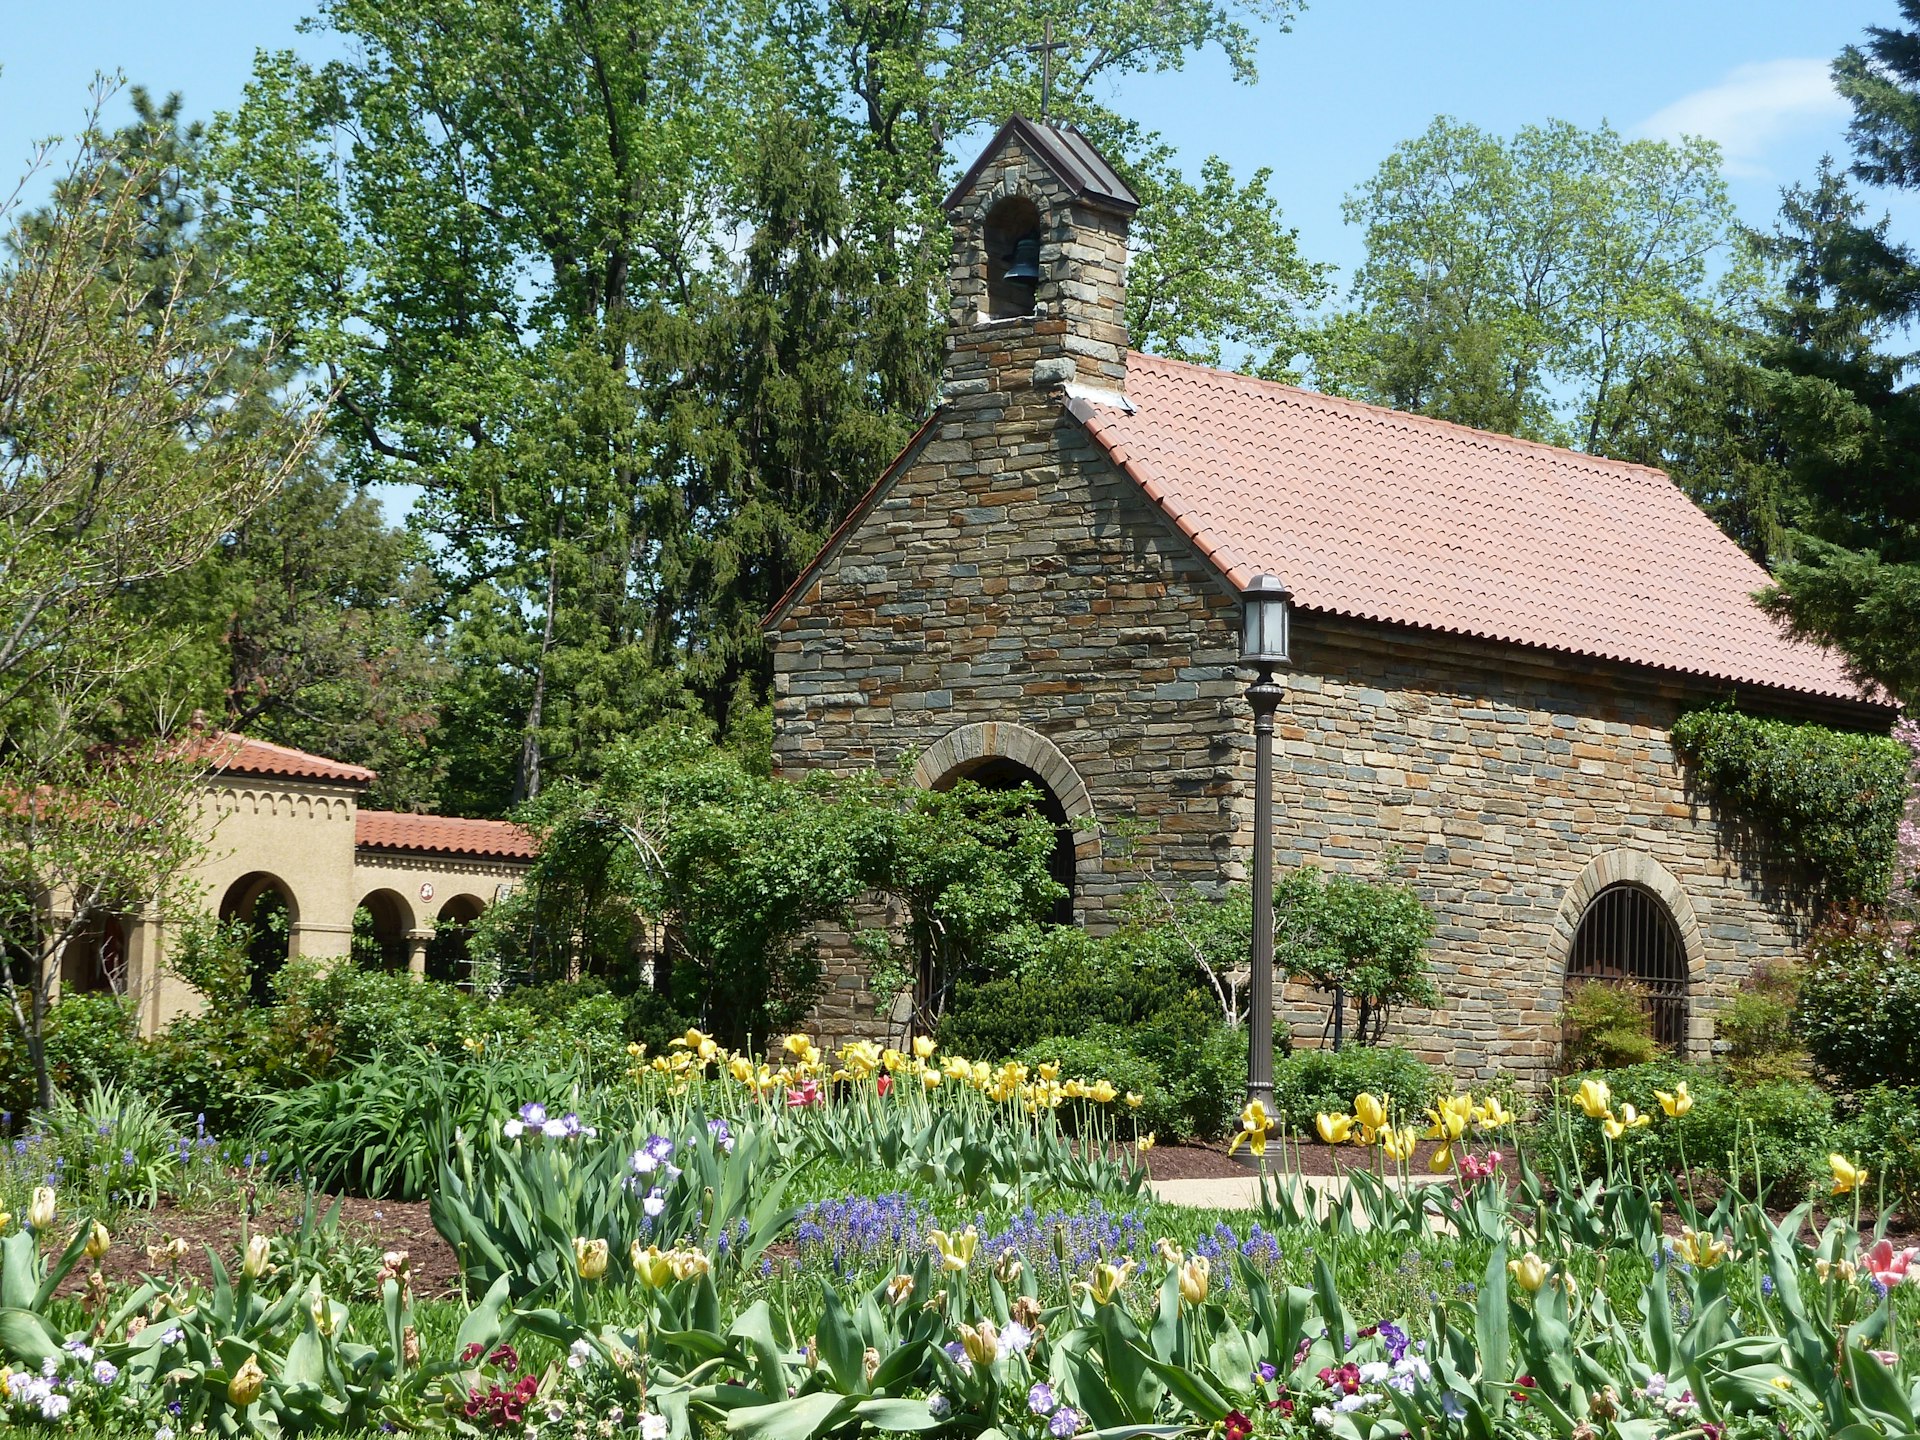 The Franciscan Monastery’s Rose Garden around Portiuncula Church is a beautiful escape from the concrete jungle of DC © Barbara Noe Kennedy / Lonely Planet